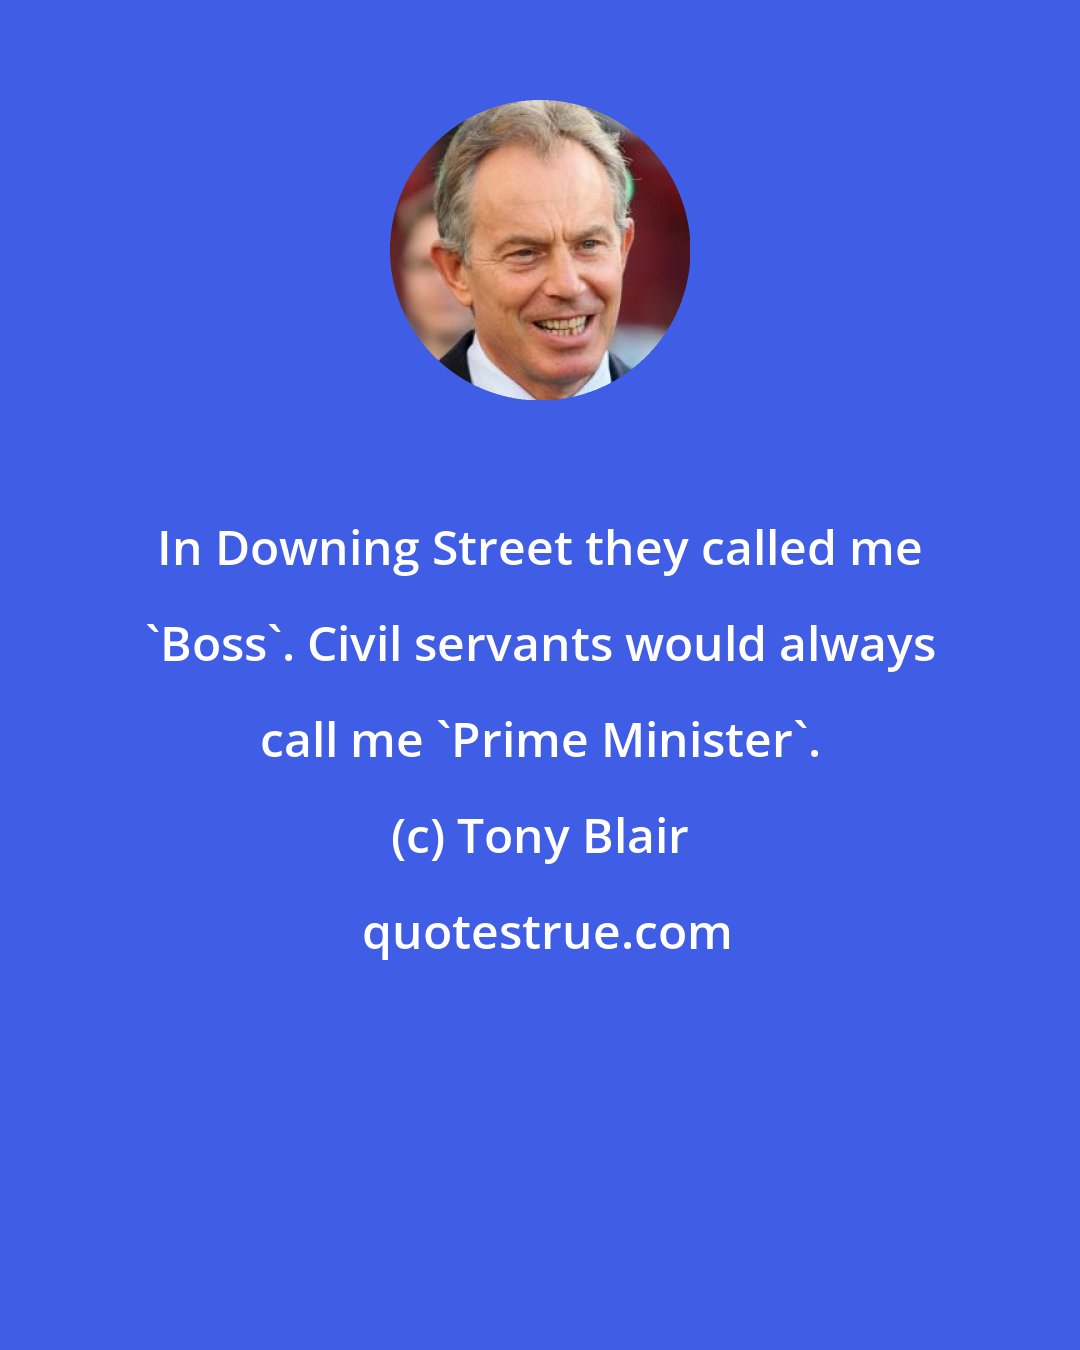 Tony Blair: In Downing Street they called me 'Boss'. Civil servants would always call me 'Prime Minister'.